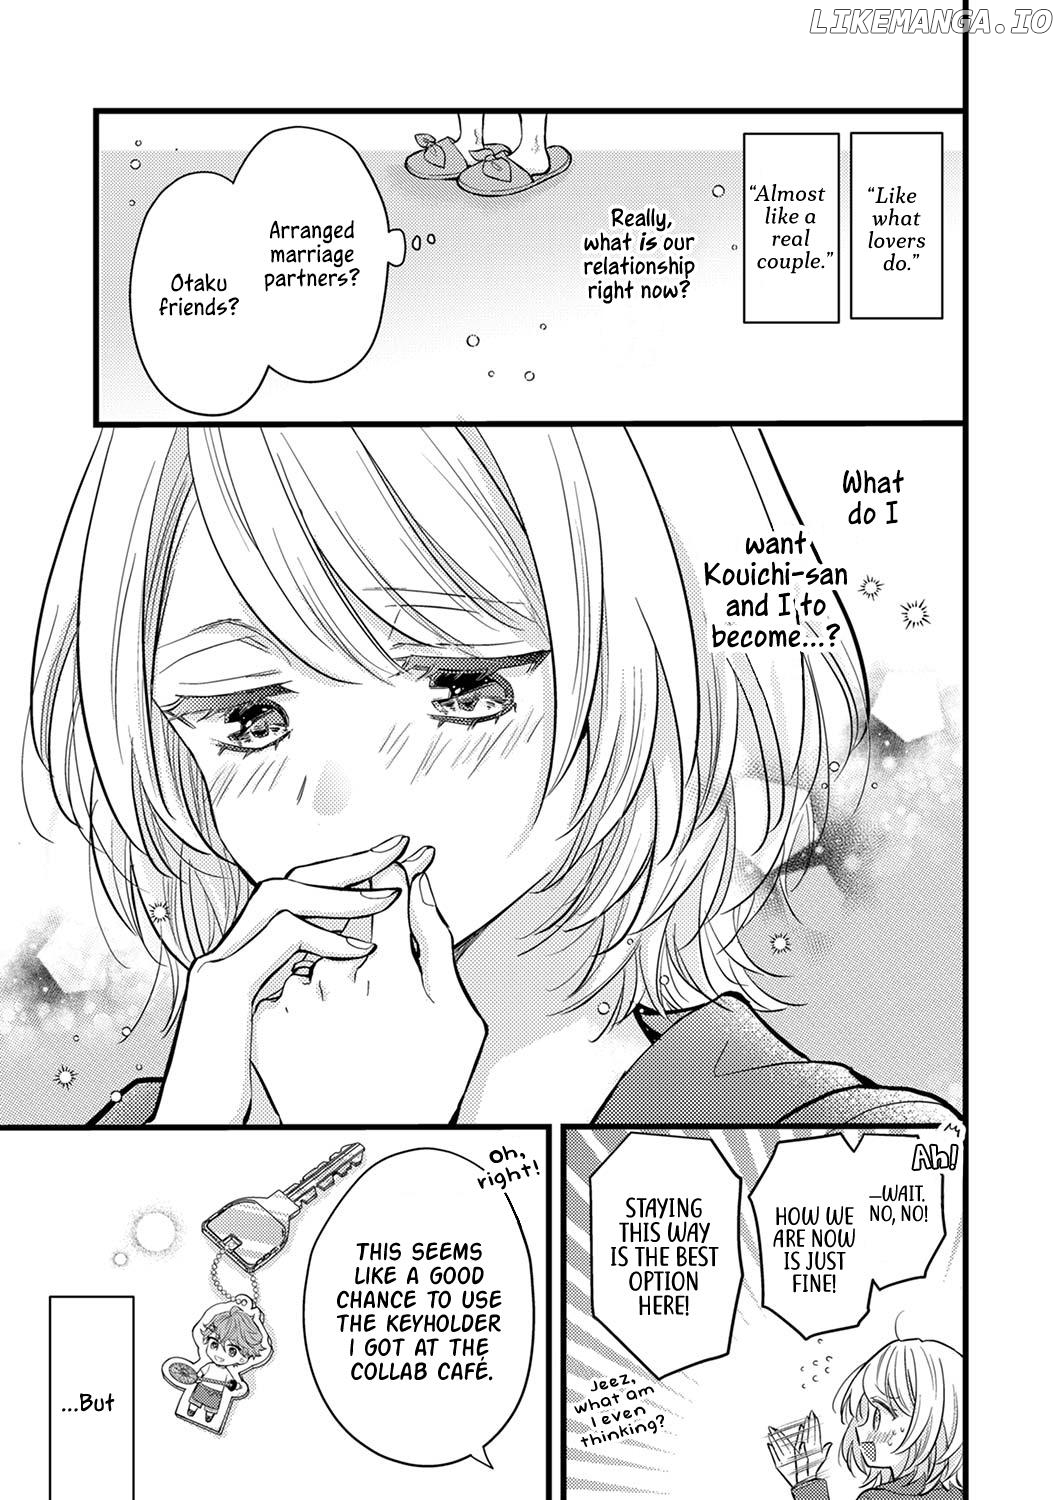 An Arranged Marriage Leads to Otaku Love Chapter 6 - page 5